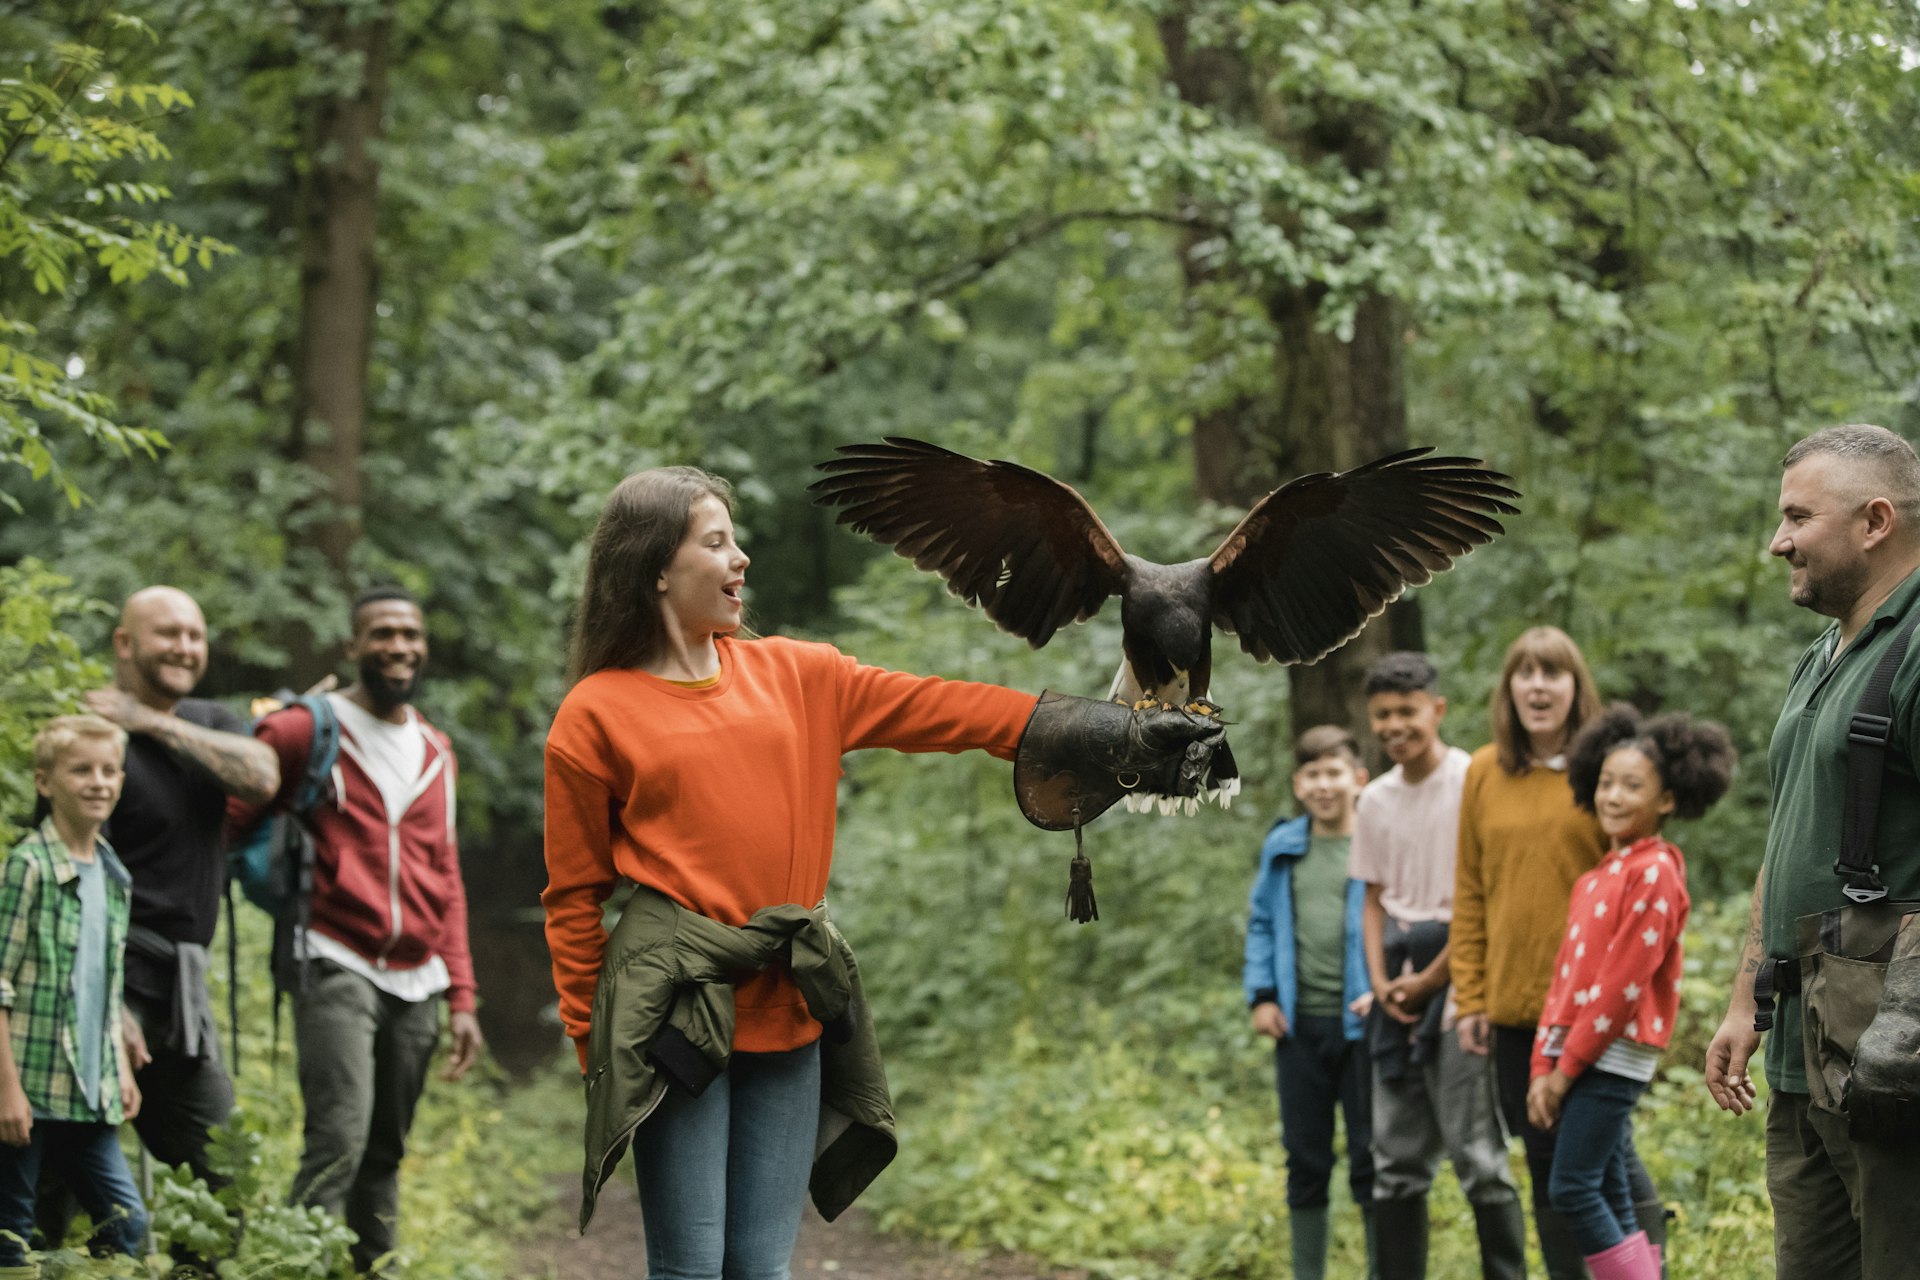 Young girl holding a bird of prey on a leather glove on her arm in woodland.